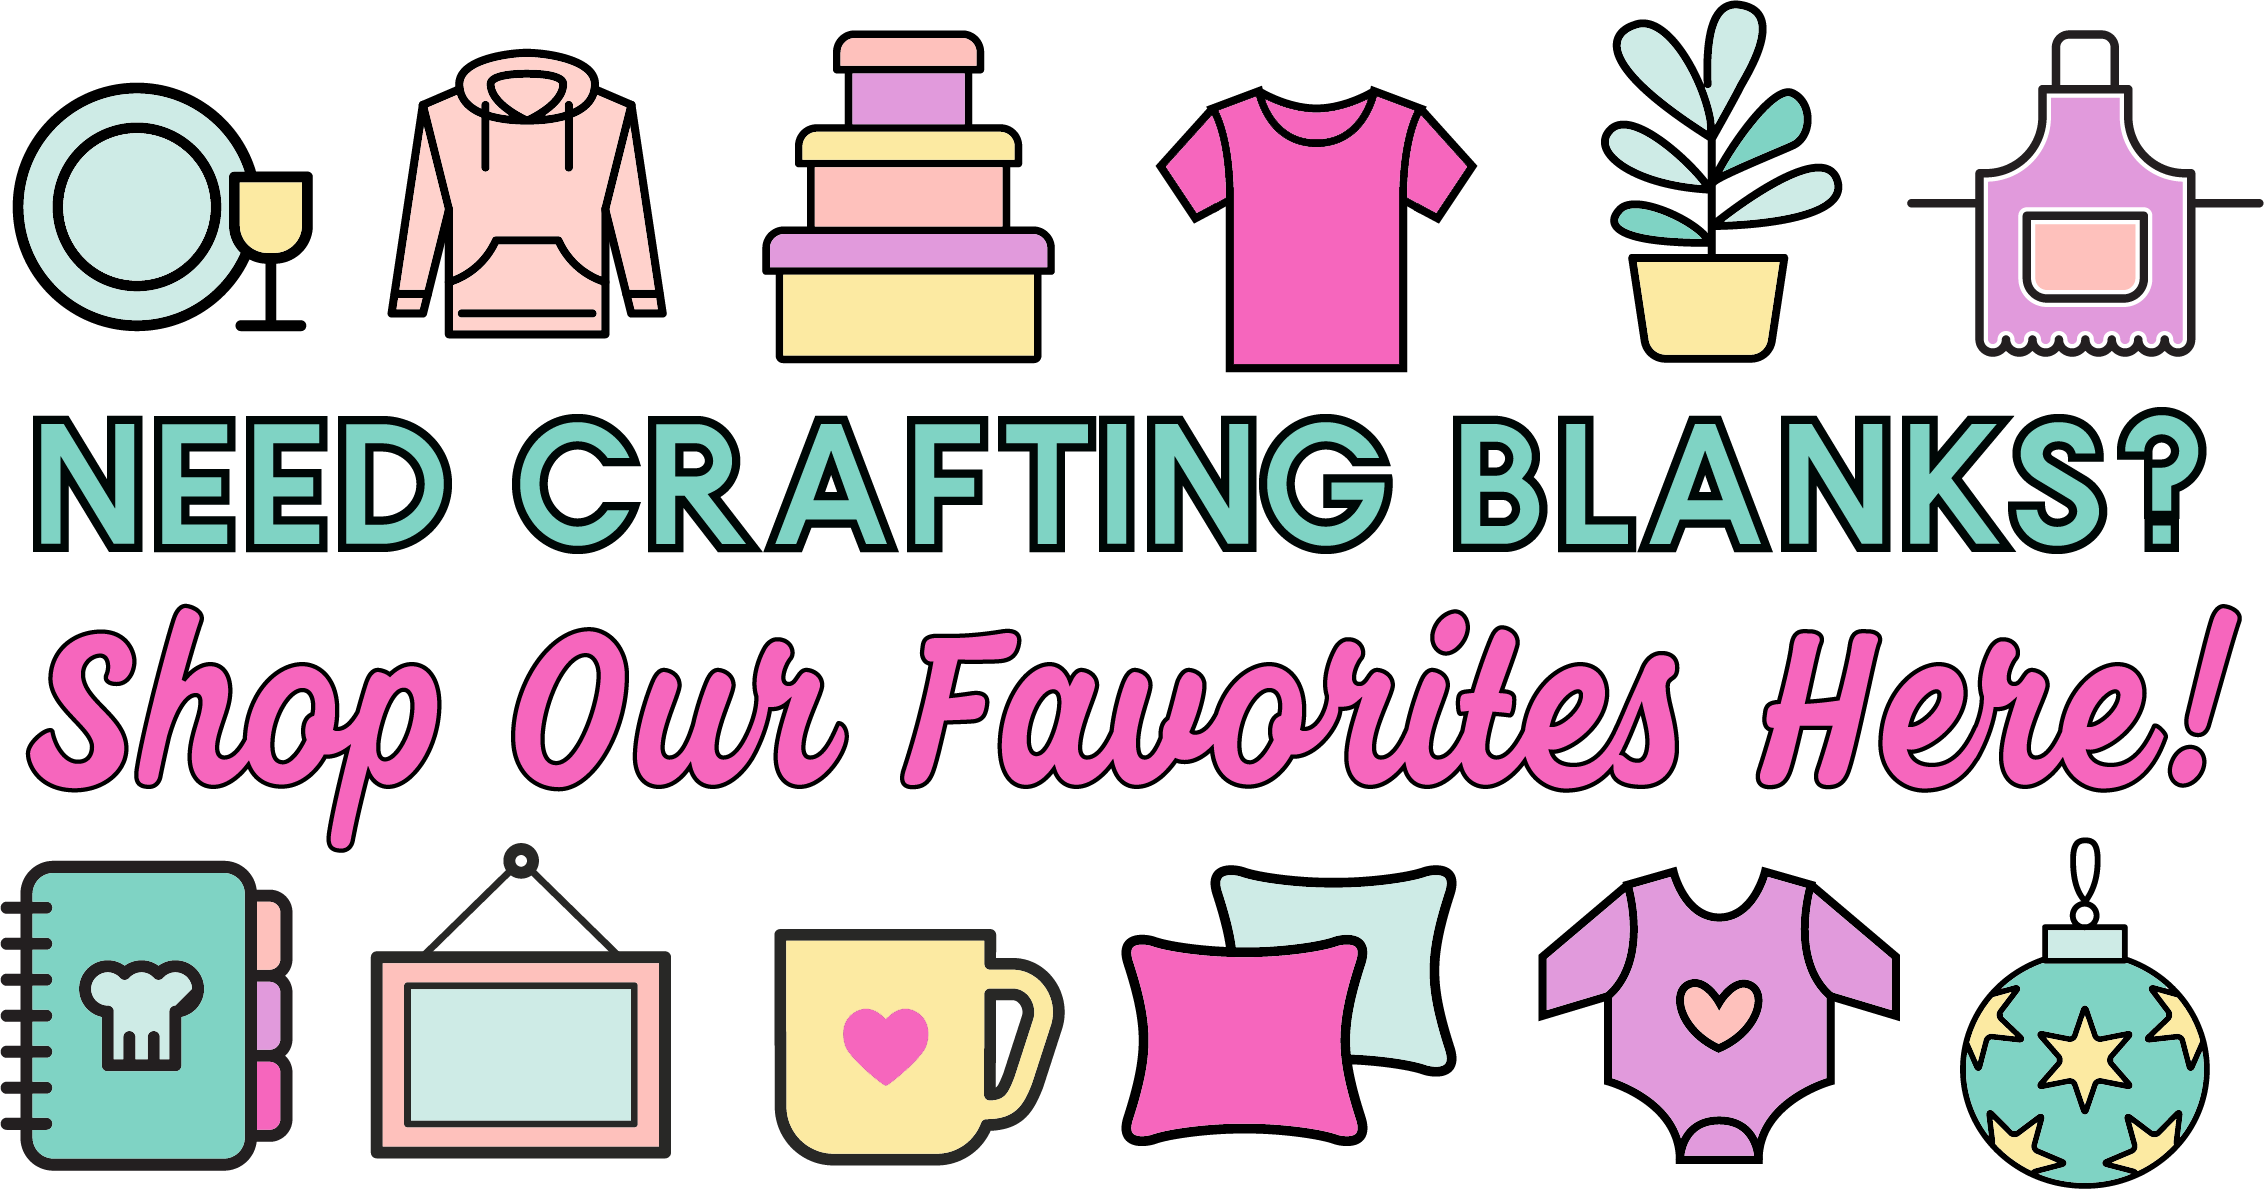 Shop for Craft Blanks Here - decorative image of blank crafting supplies